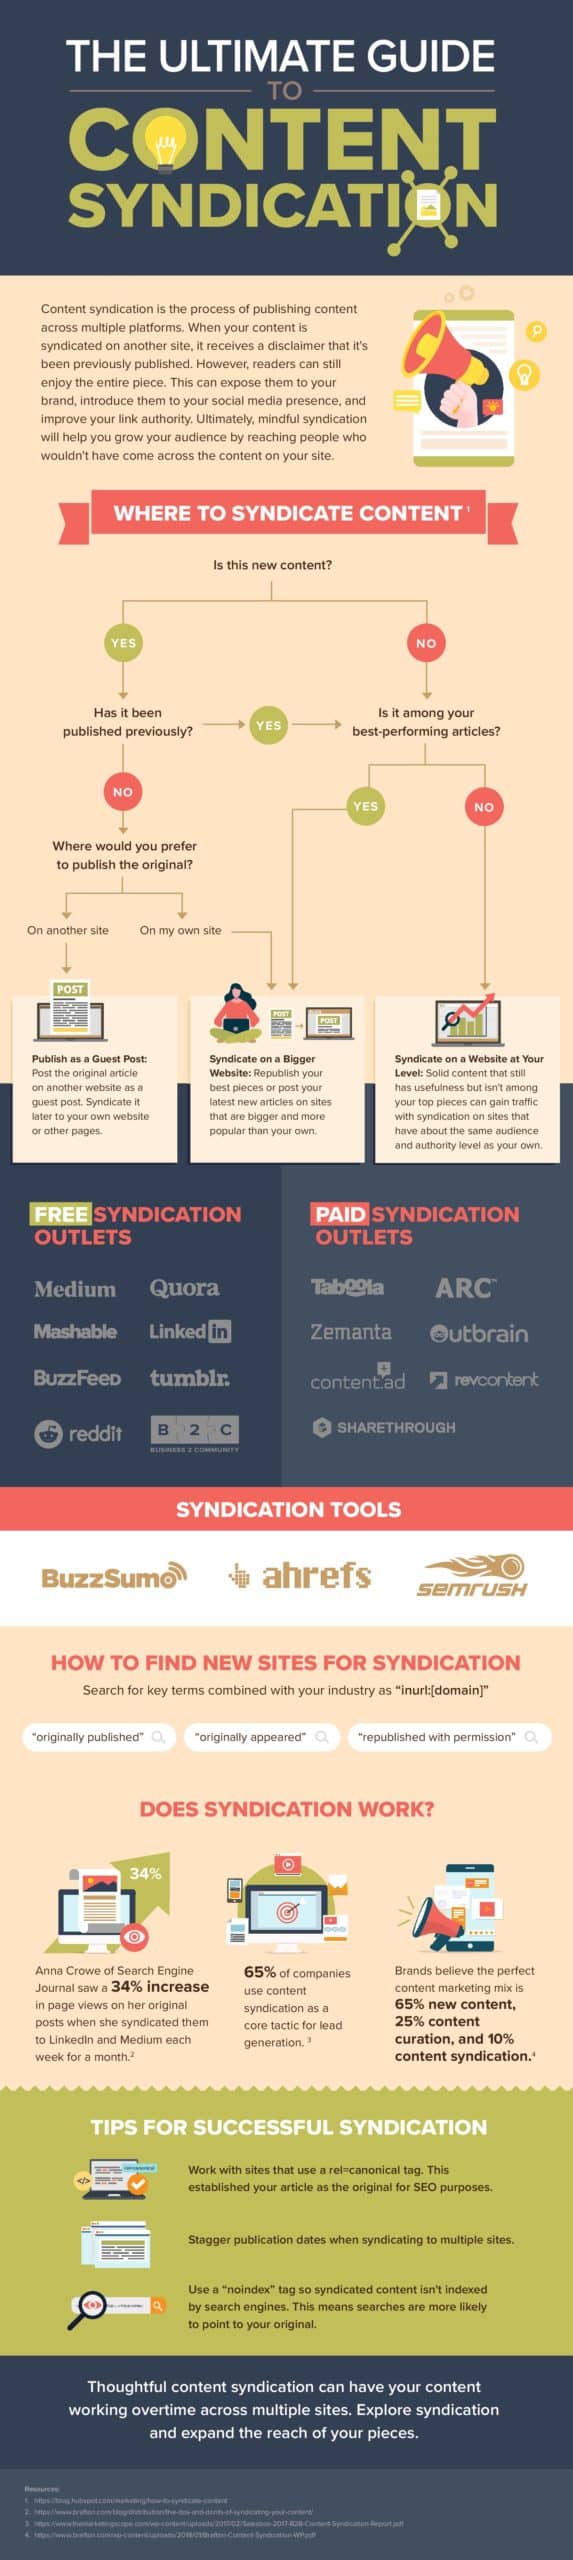 Infographic: A guide to Content Syndication intro